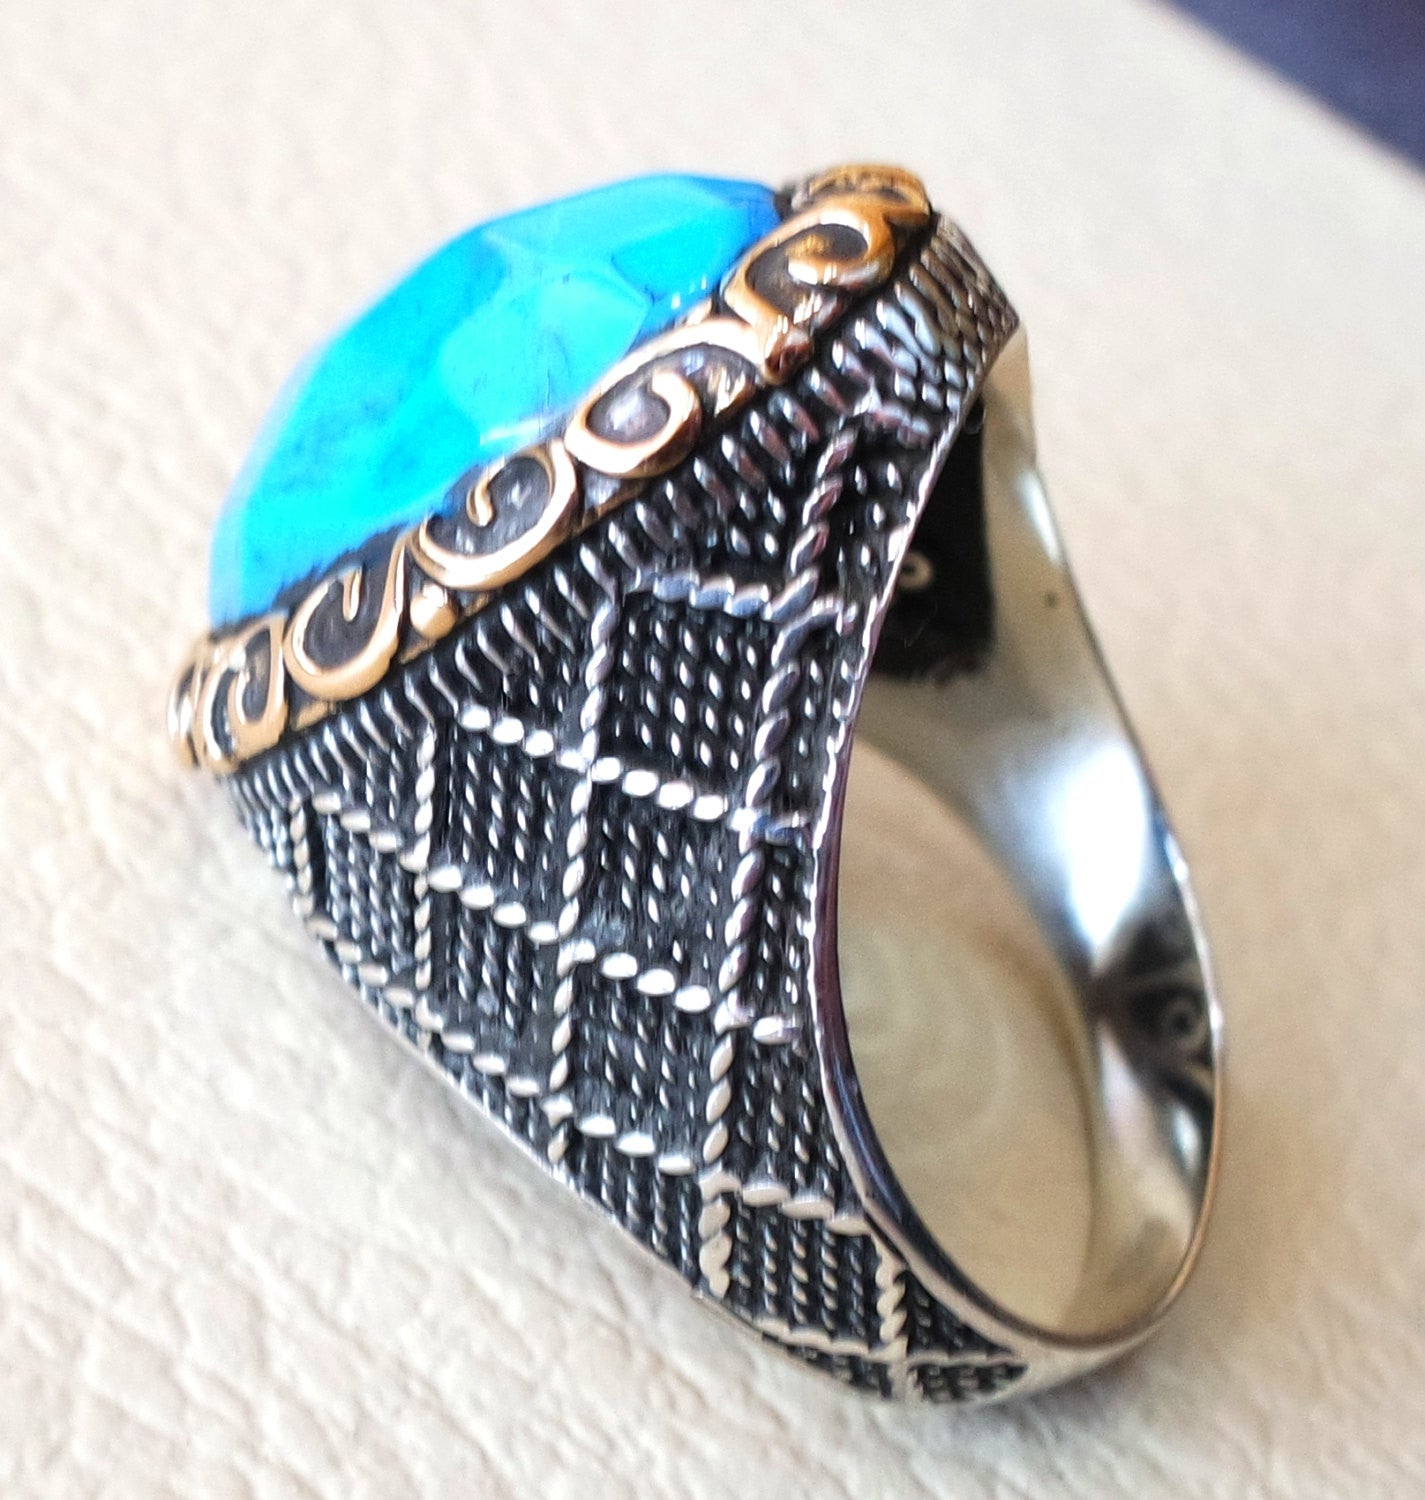 synthetic turquoise blue stone heavy sterling silver 925 man ring  bronze copper frame any size antique middle eastern ottoman style jewelry